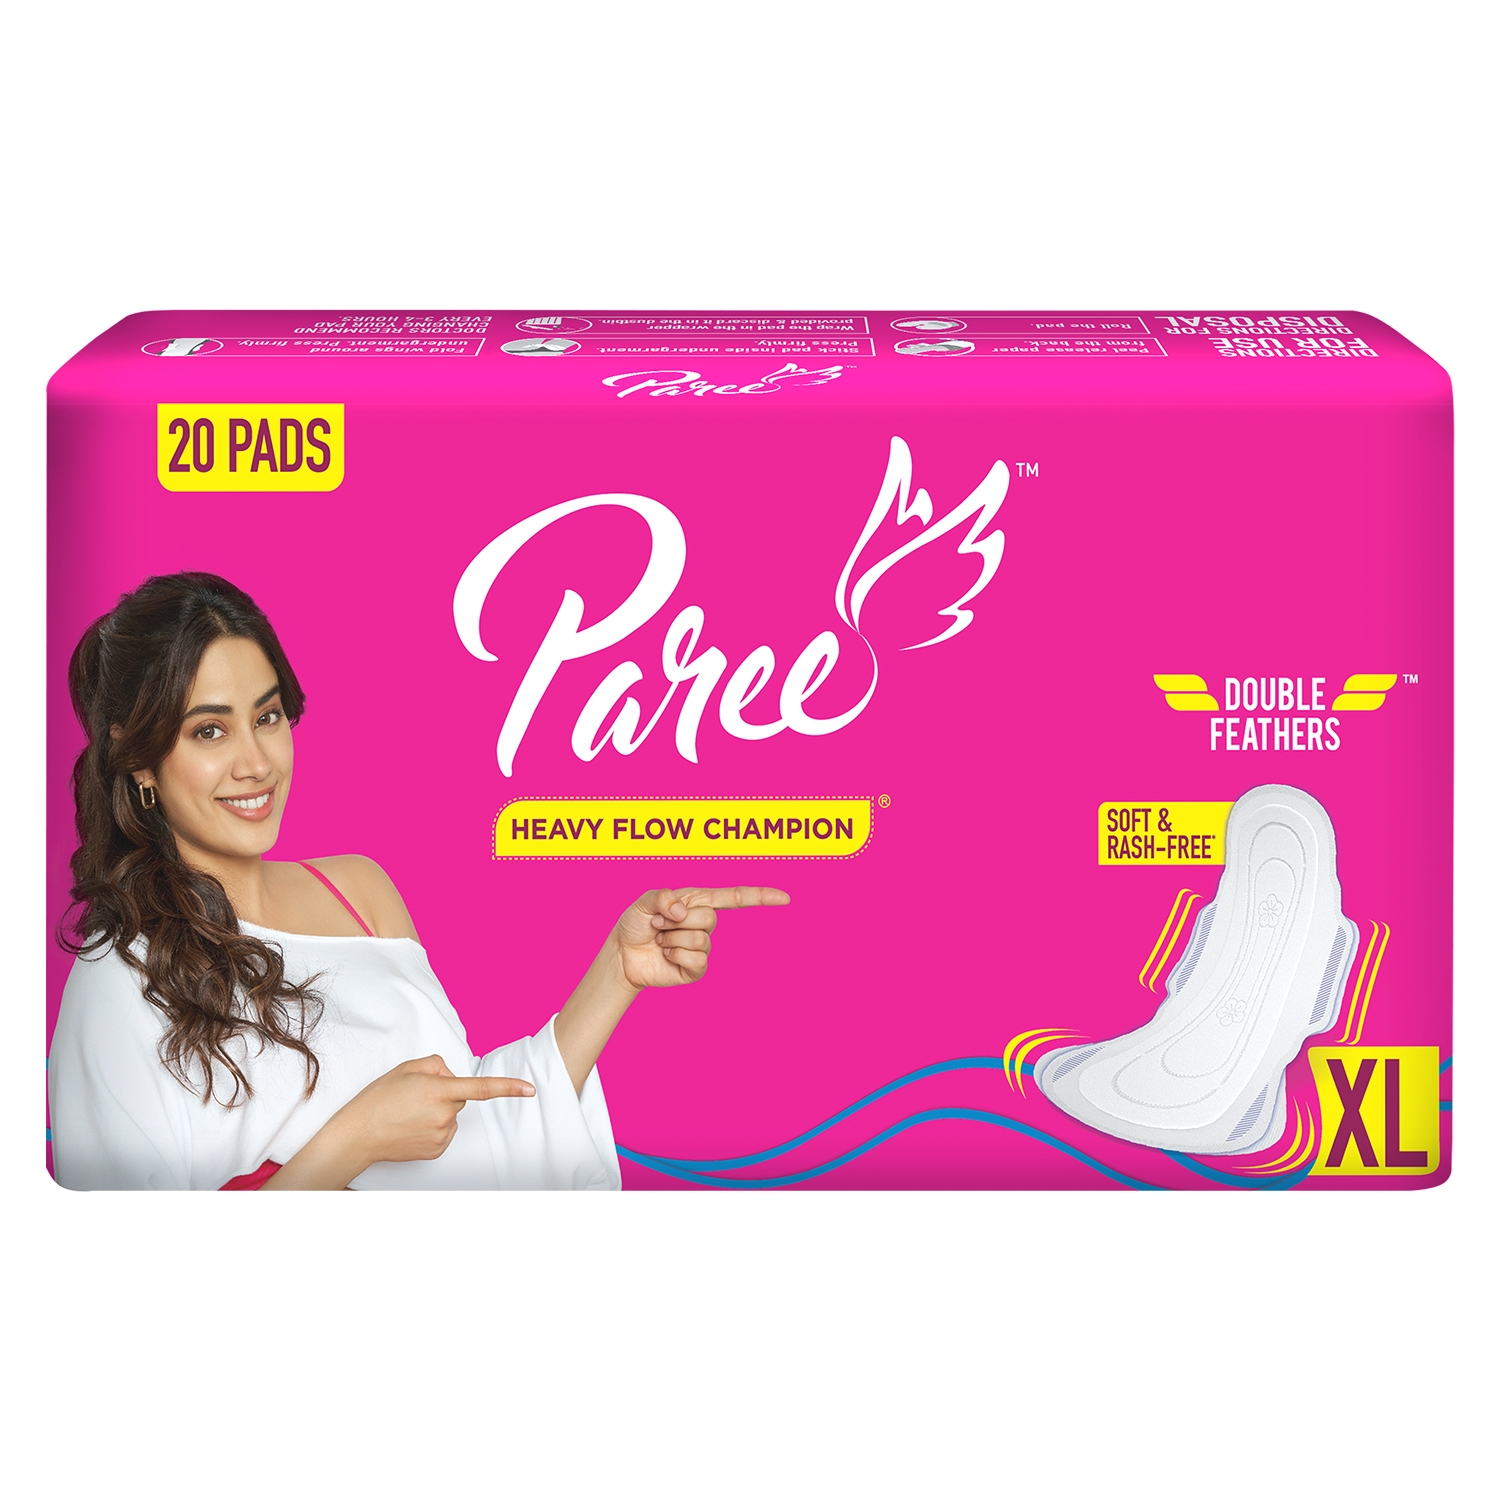 Paree | Paree Soft & Rash Free XL Sanitary Pads, With 3 Seconds Absorption For Heavy Flow - 20 Pads 0